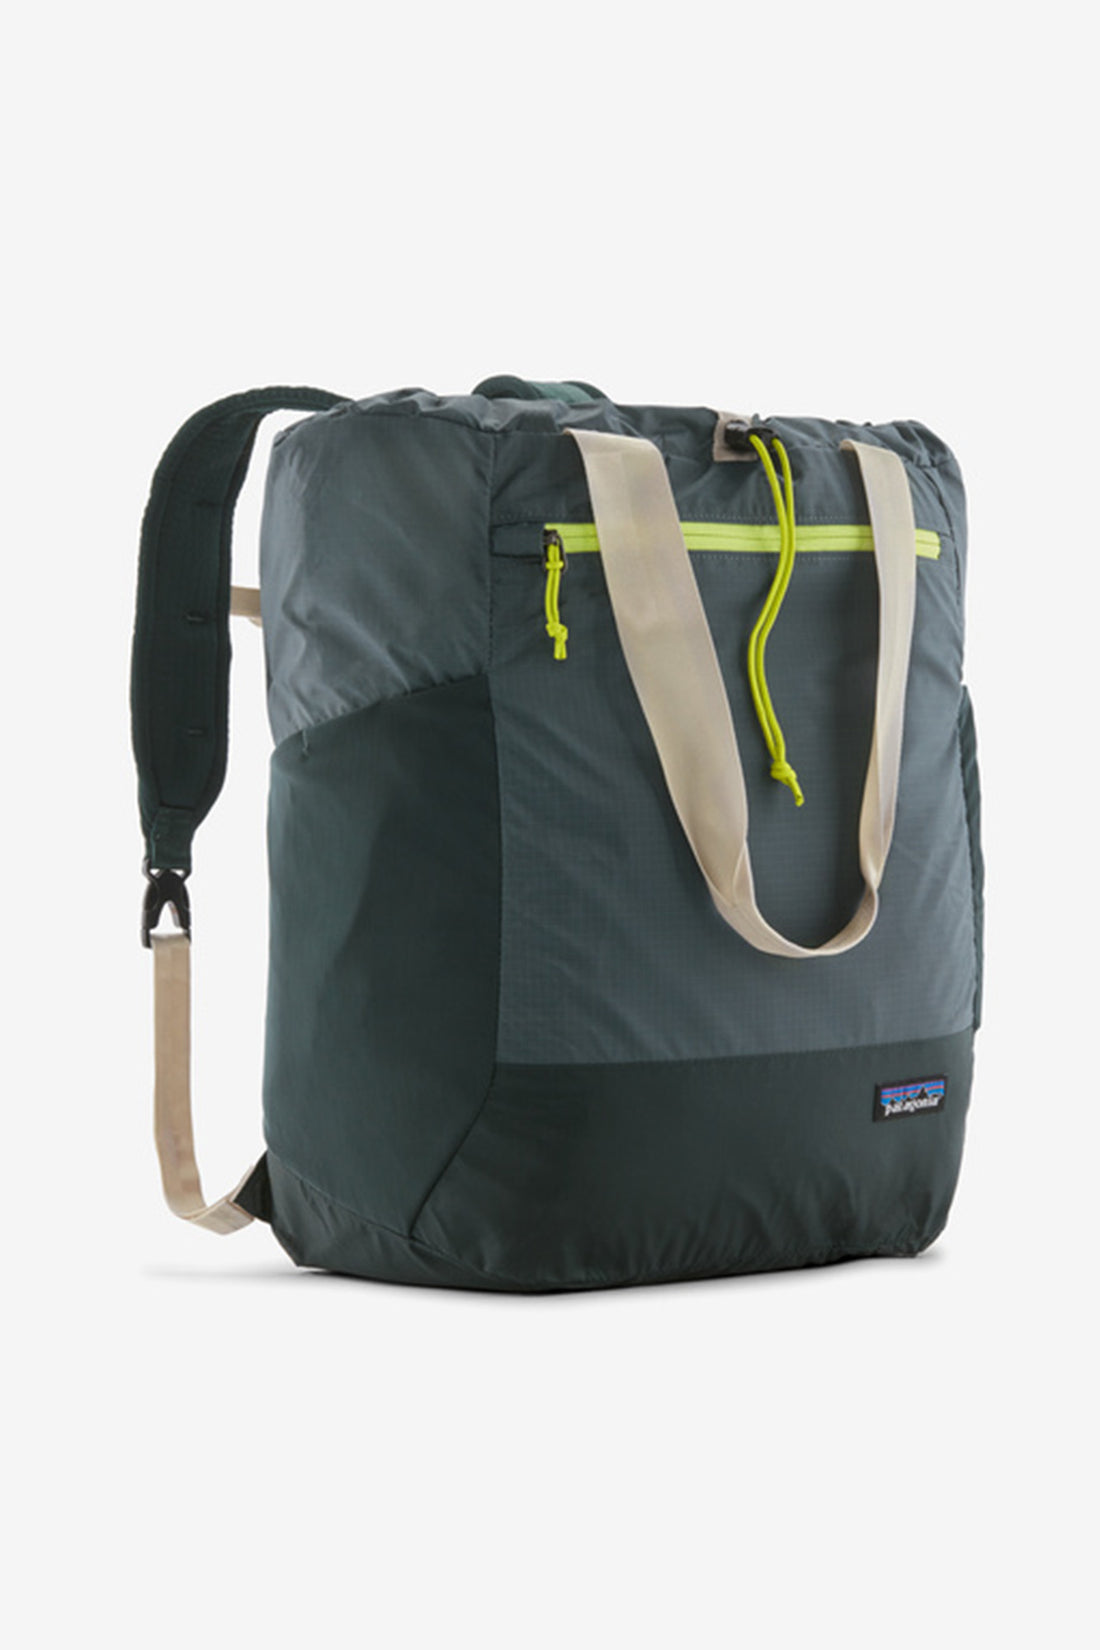 PATAGONIA ULTRALIGHT BLACK HOLE TOTE PACK 27L - NOUVEAU GREEN BACKPACK PATAGONIA   